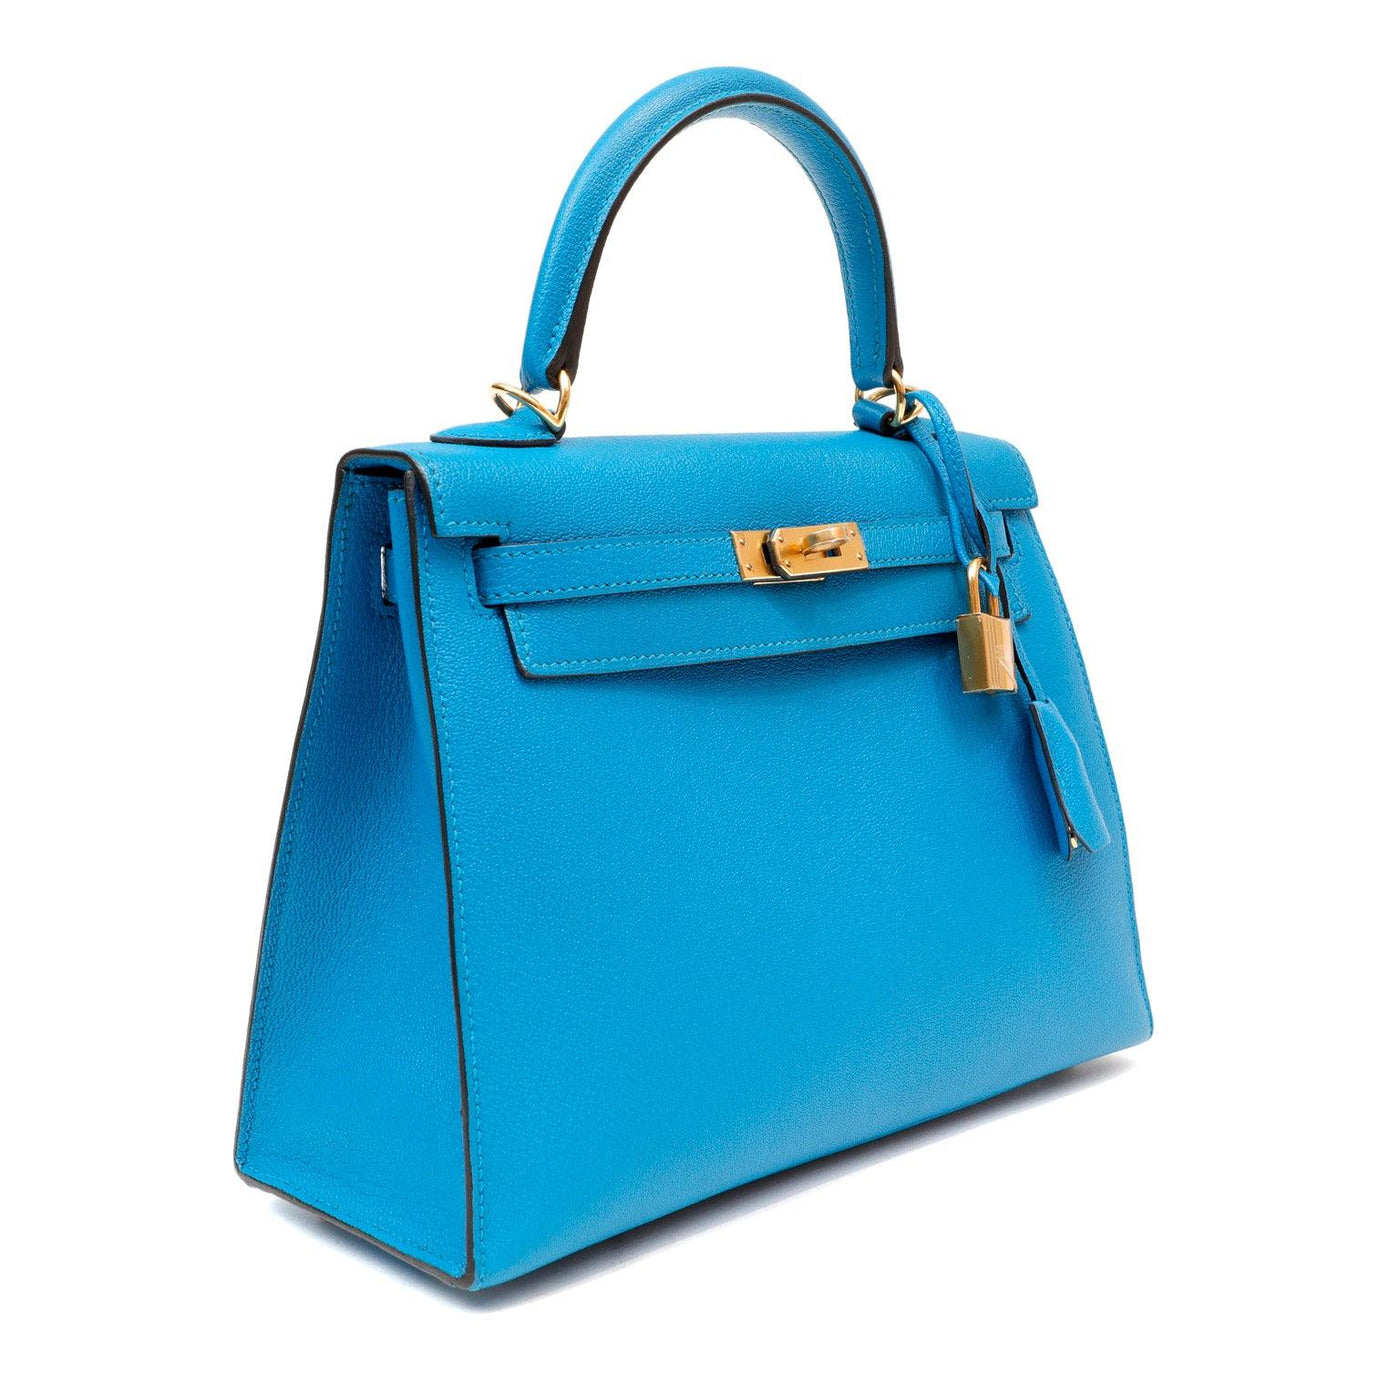 Hermès 25cm Turquoise Blue Chevre Kelly with Gold Hardware - Only Authentics